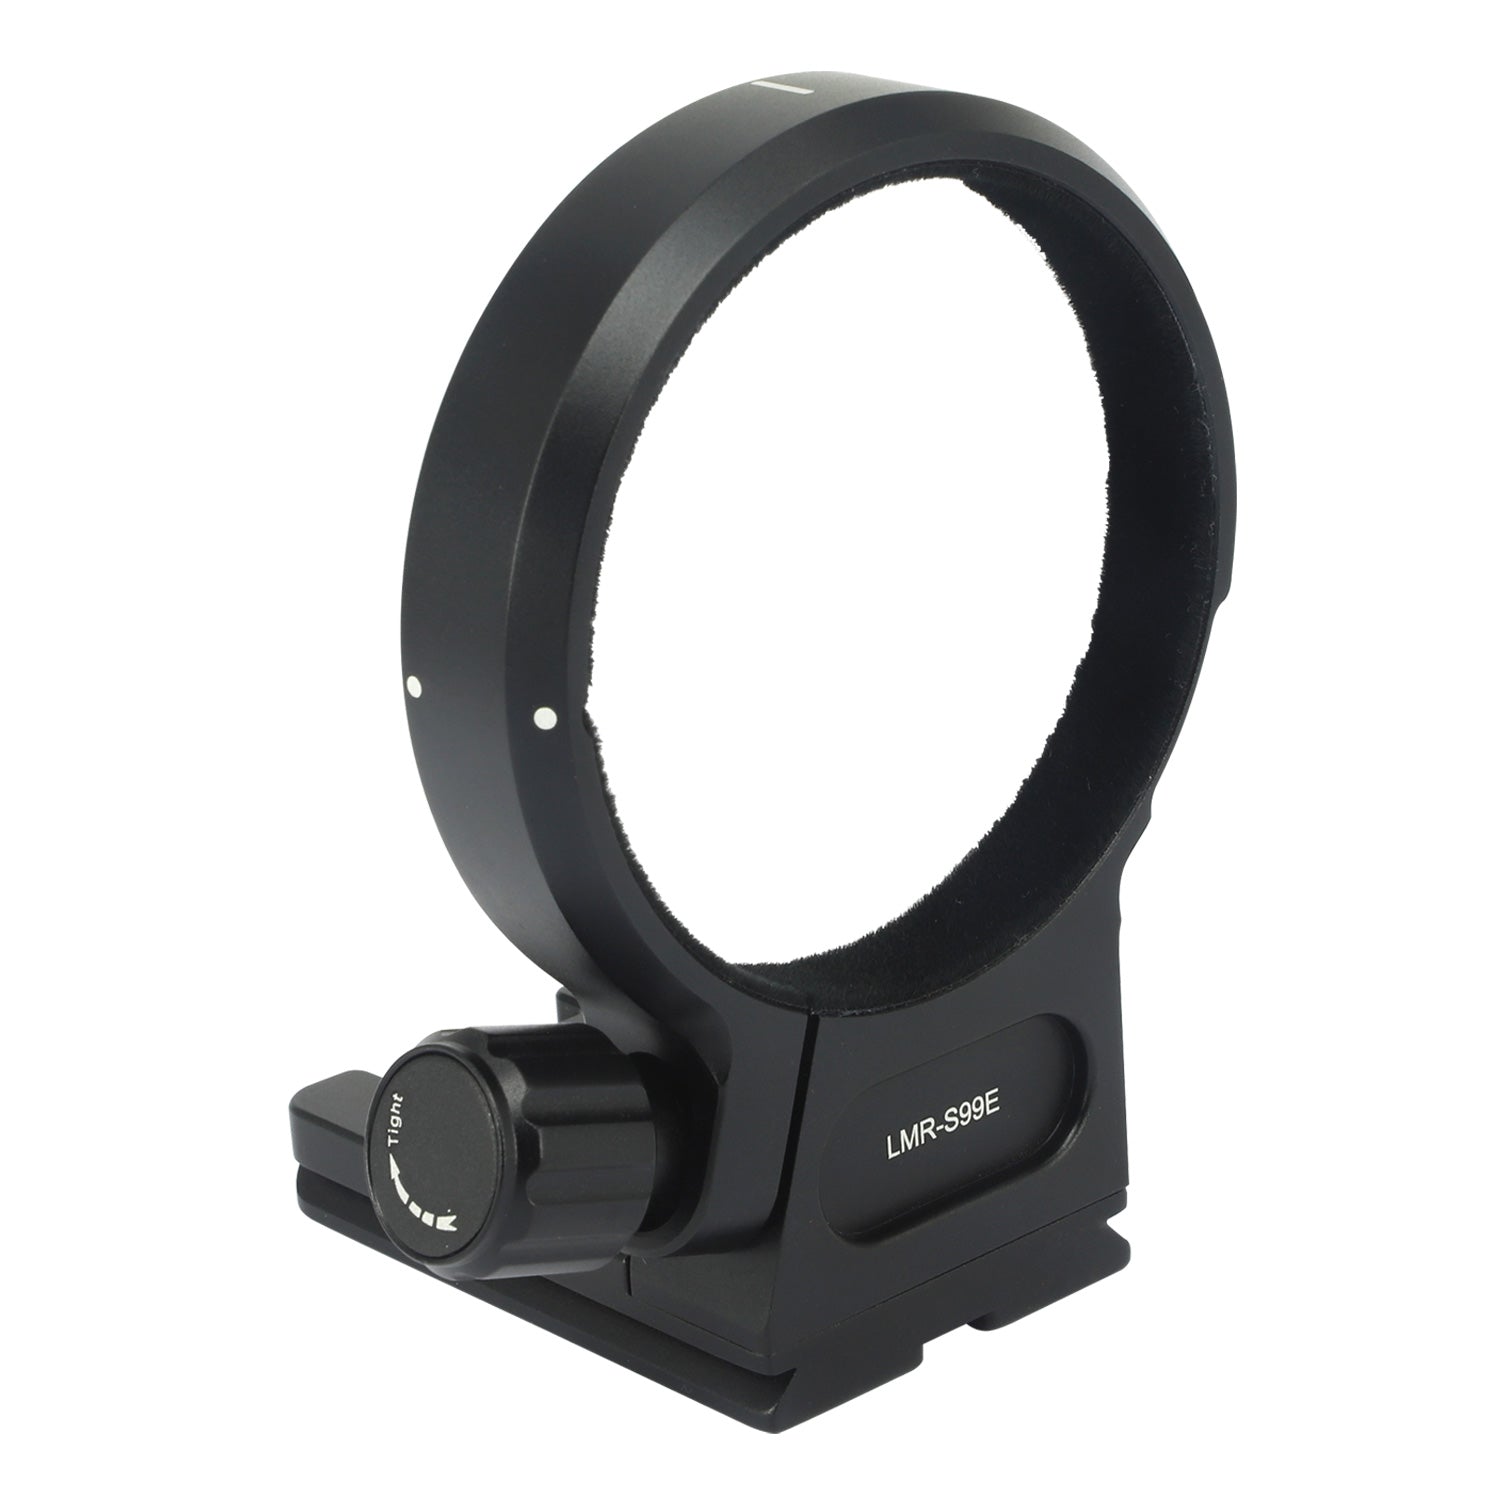 Haoge LMR-S99E Lens Collar Replacement Foot Tripod Mount Ring for Sony :FE24-240MM F3.5-6.3 OSS FE24-70MM F2.8 GM FE16-35F2.8GM FE18-105MMF4 G OSS Pz,FE-12-24MM/F4G FE24MMF1.4GM FE35MM F1.4za Lens built-in Arca Swiss Type Quick Release Plate